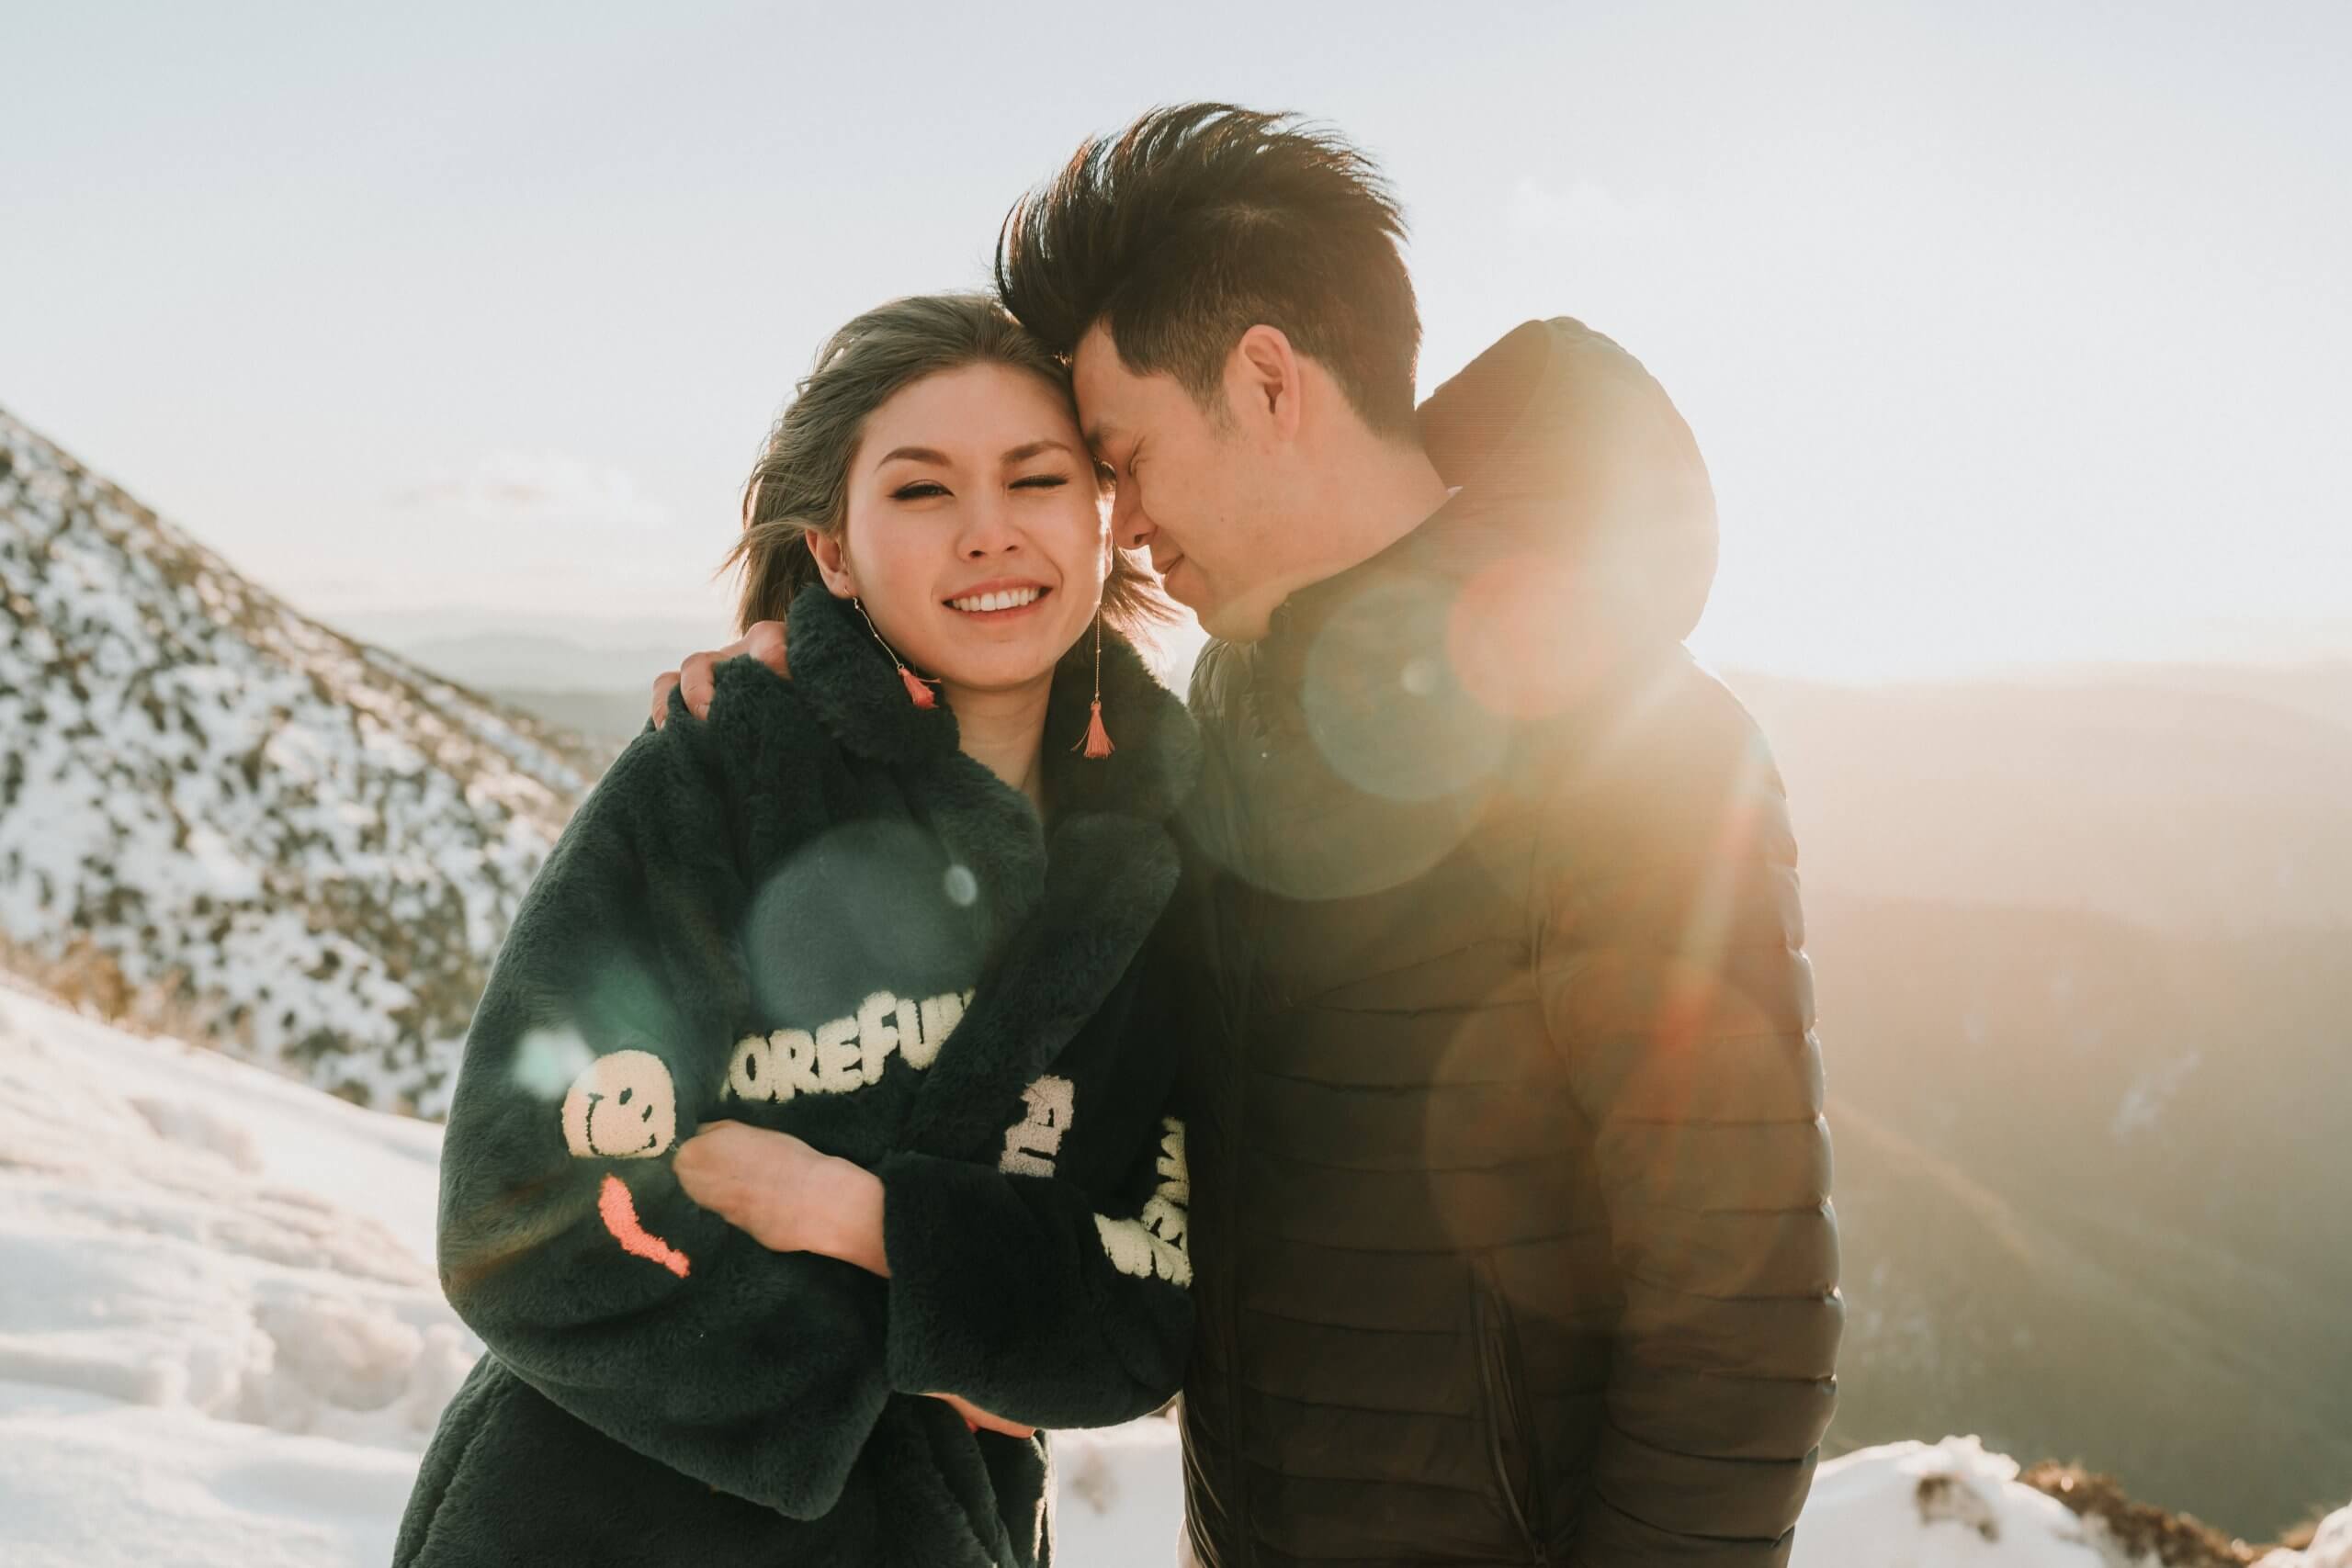 Bride and groom, clad in their winter outfits on top of a snowy mountain at sunrise.